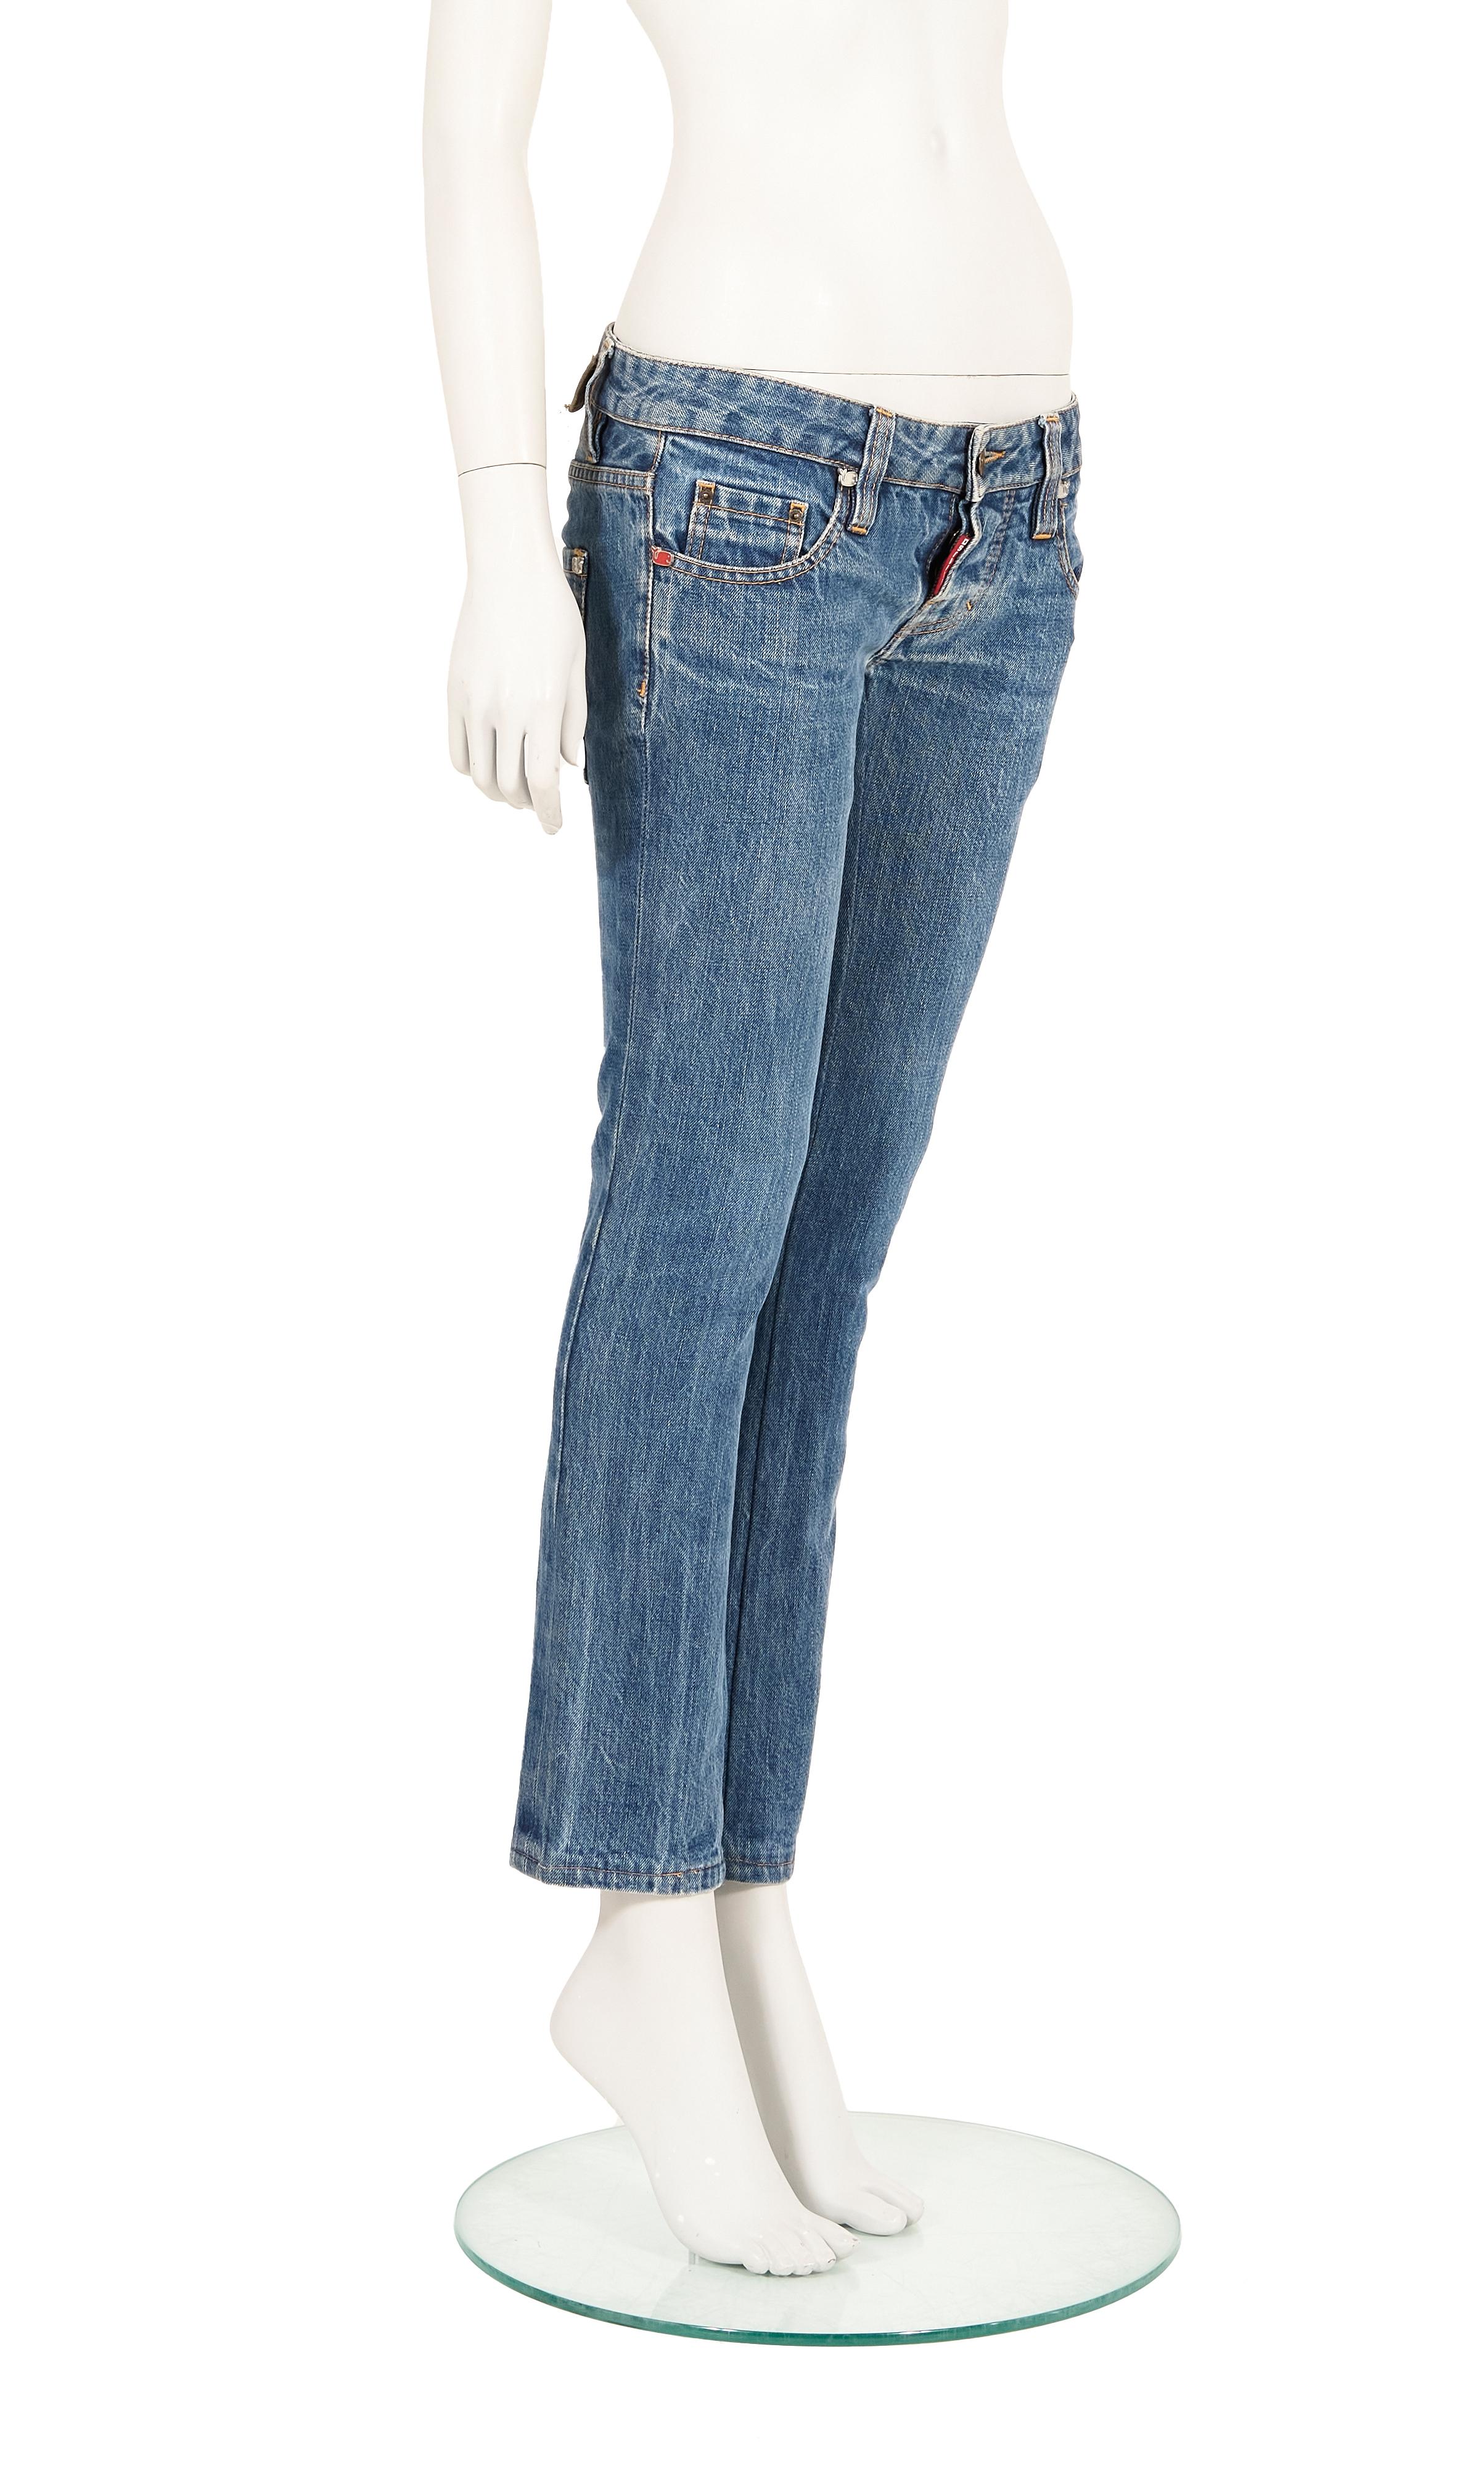 Women's Dsquared2 S/S 2007 ultra low-rise skinny jeans For Sale